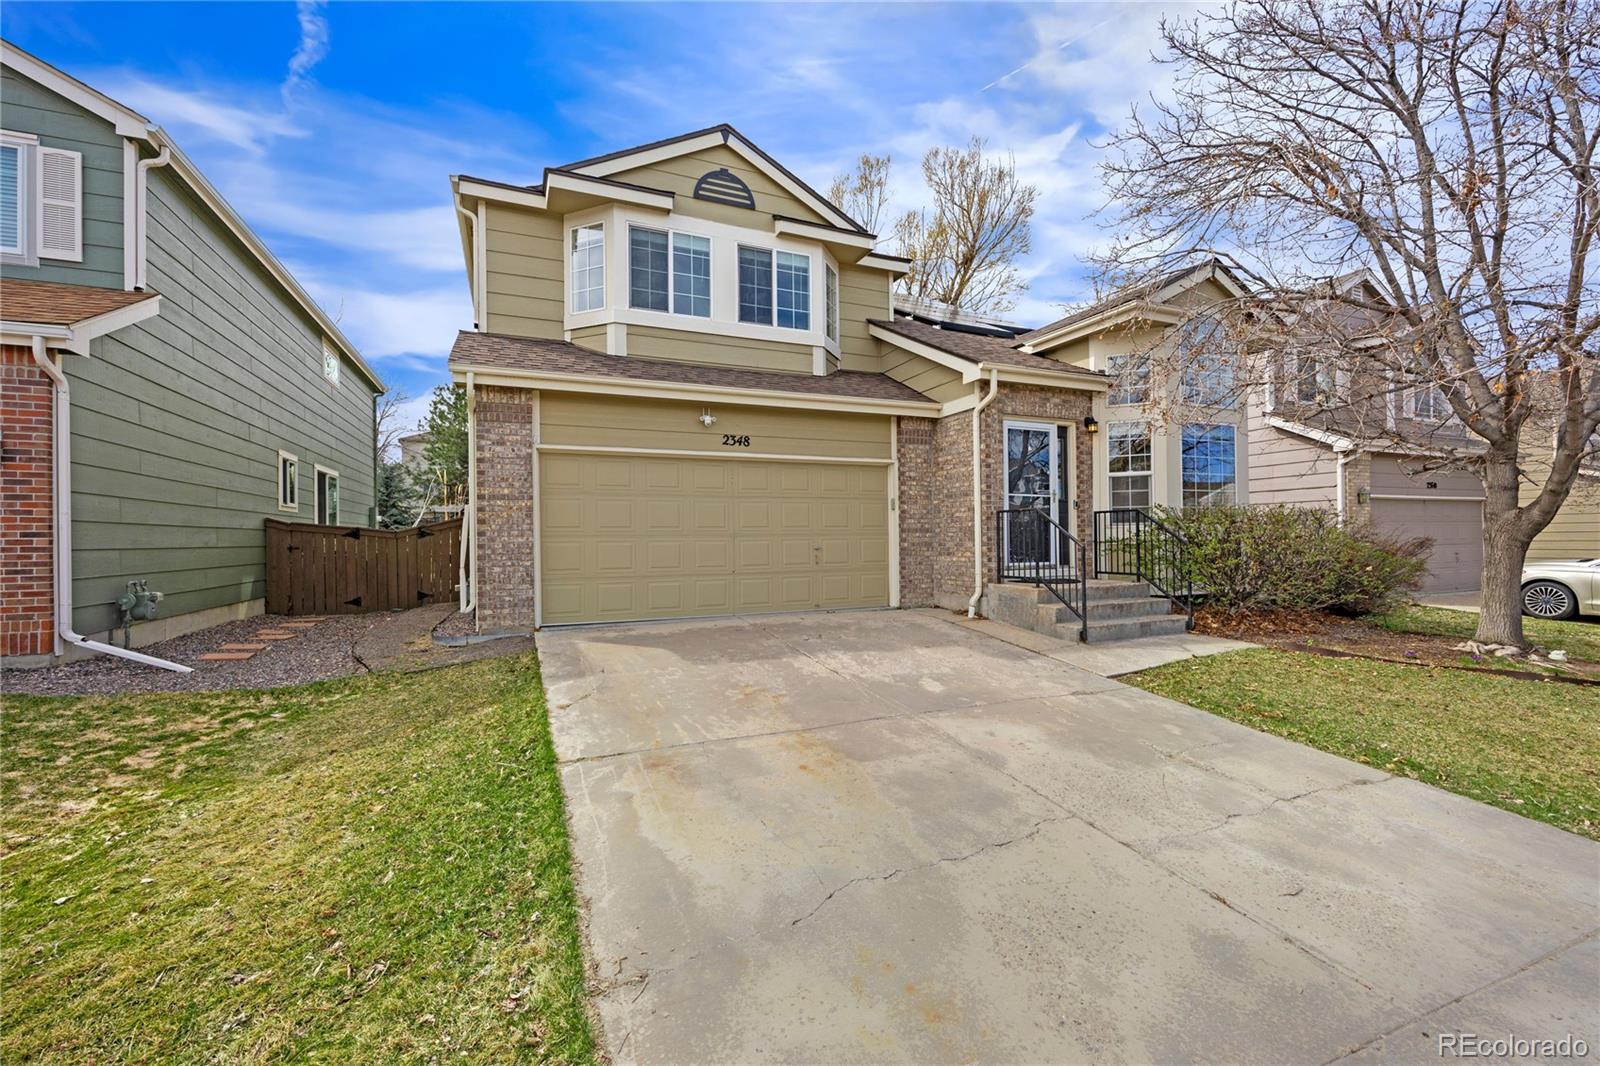 2348  gold dust trail, highlands ranch sold home. Closed on 2024-05-03 for $655,000.